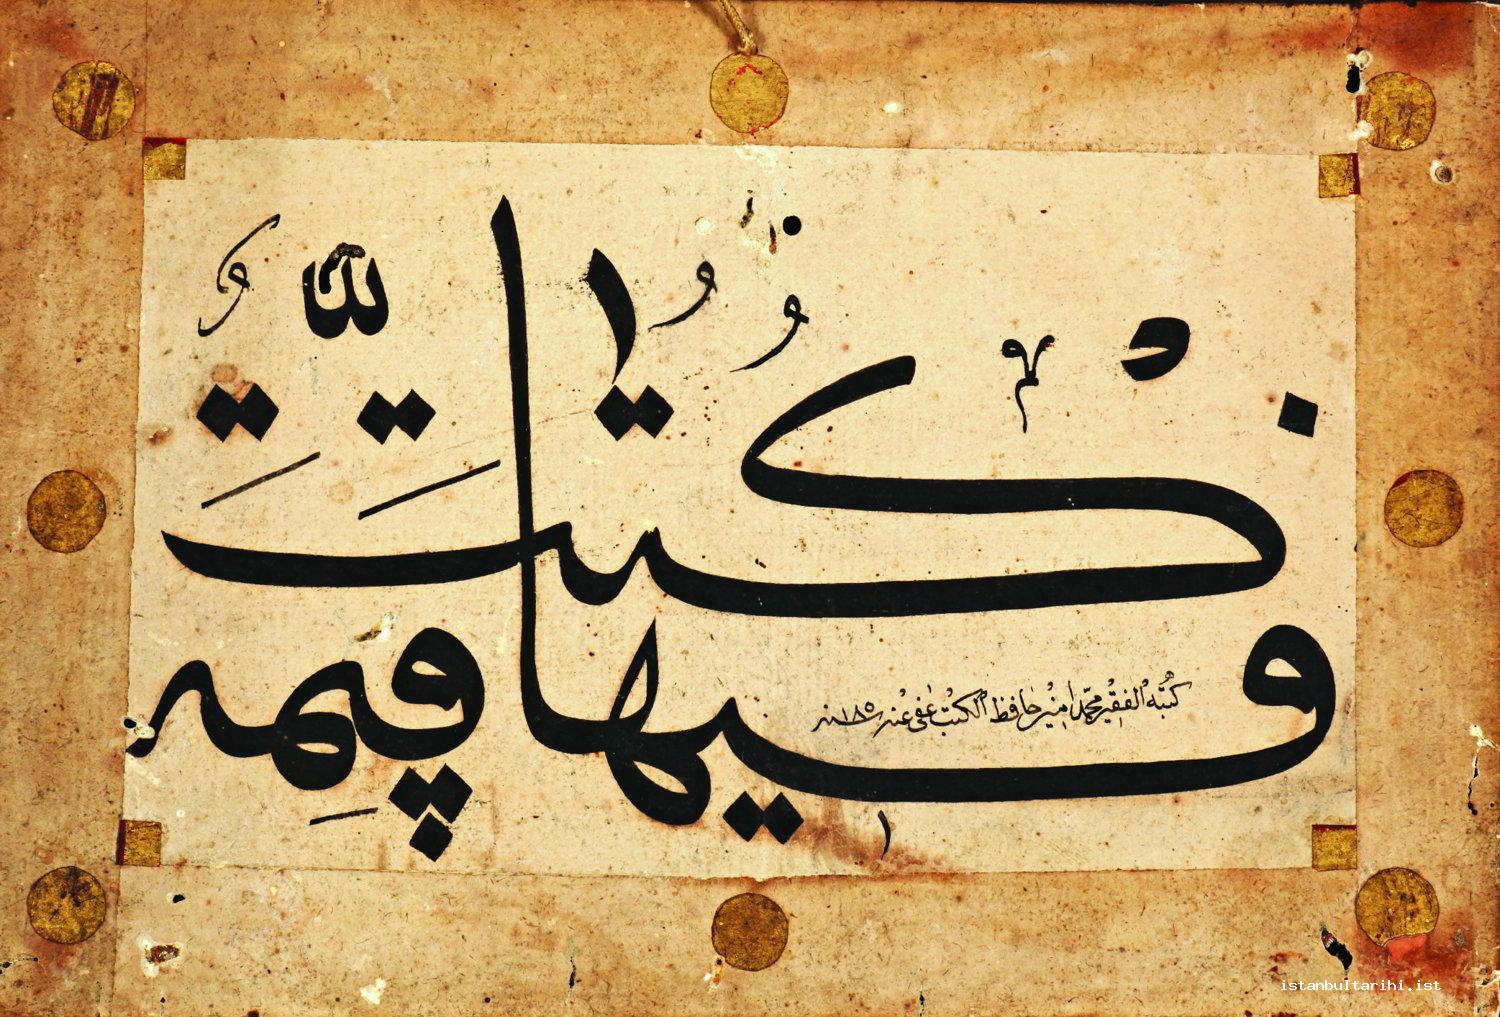 9b- A librarian’s (Mehmed Emin Efendi’s) invocations in his own calligraphy: Fiha Kutubun Qayyima